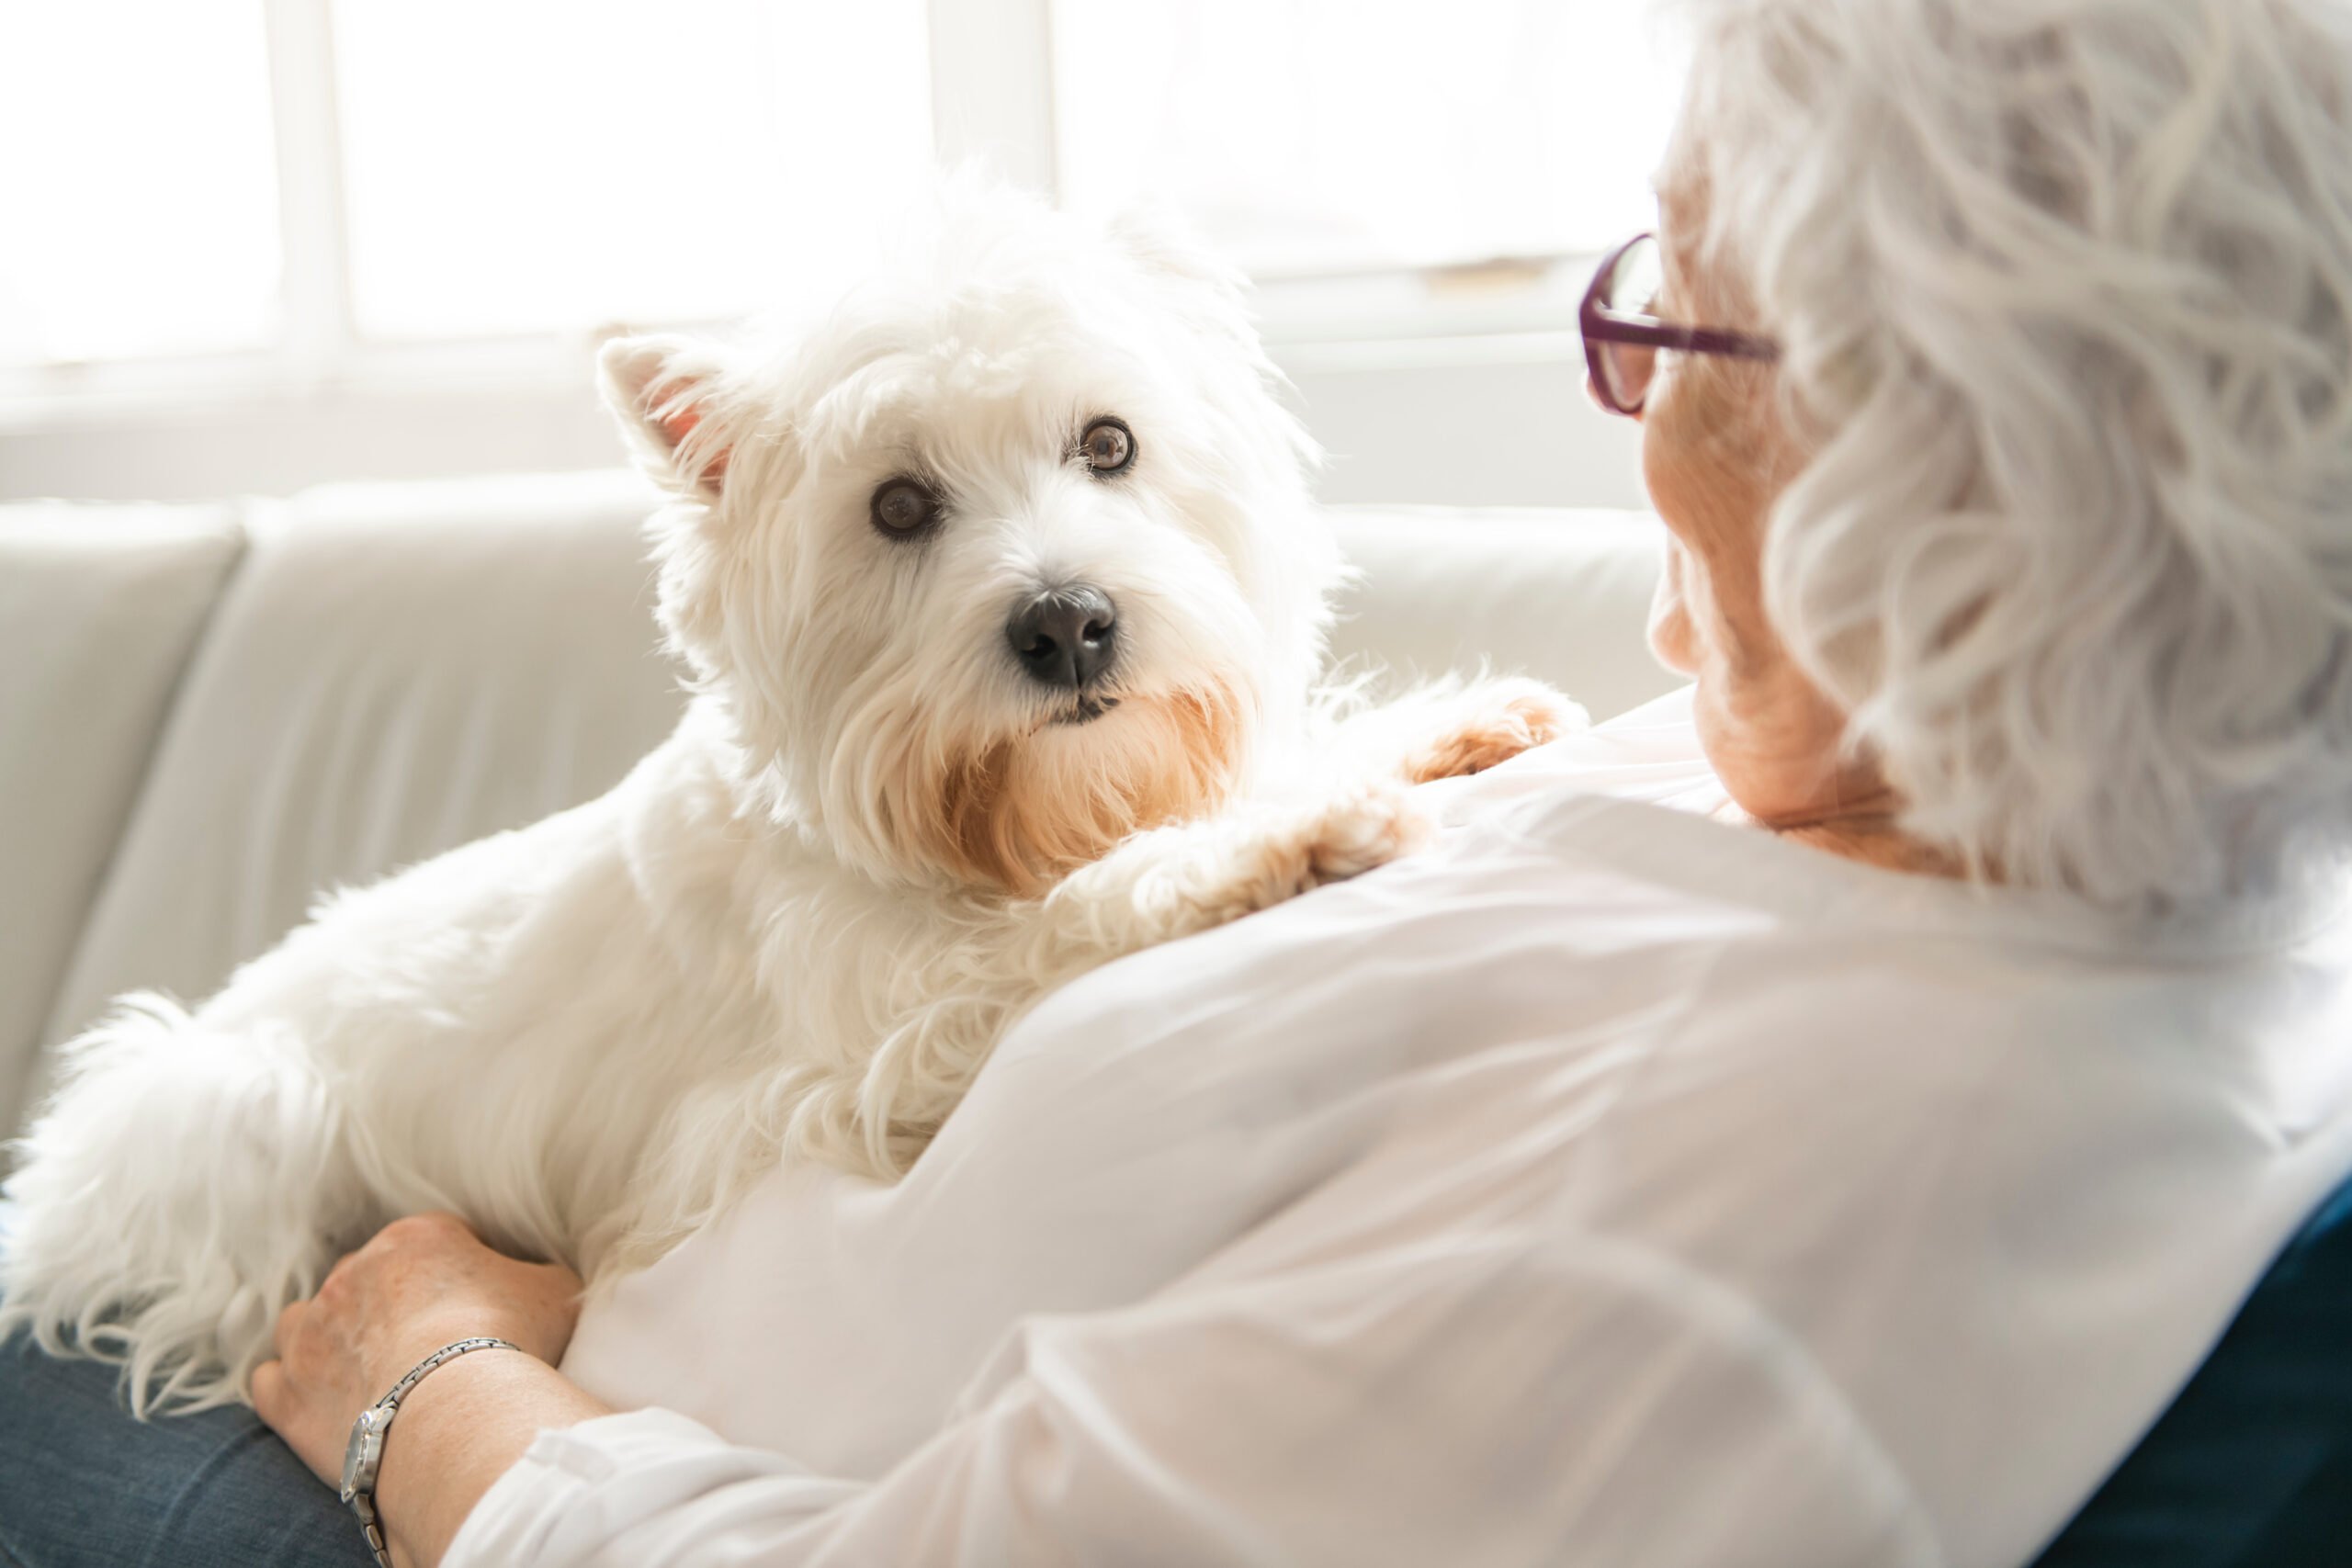 The Therapy Pet On Couch Next To Elderly Person In Retirement Rest Home For Seniors